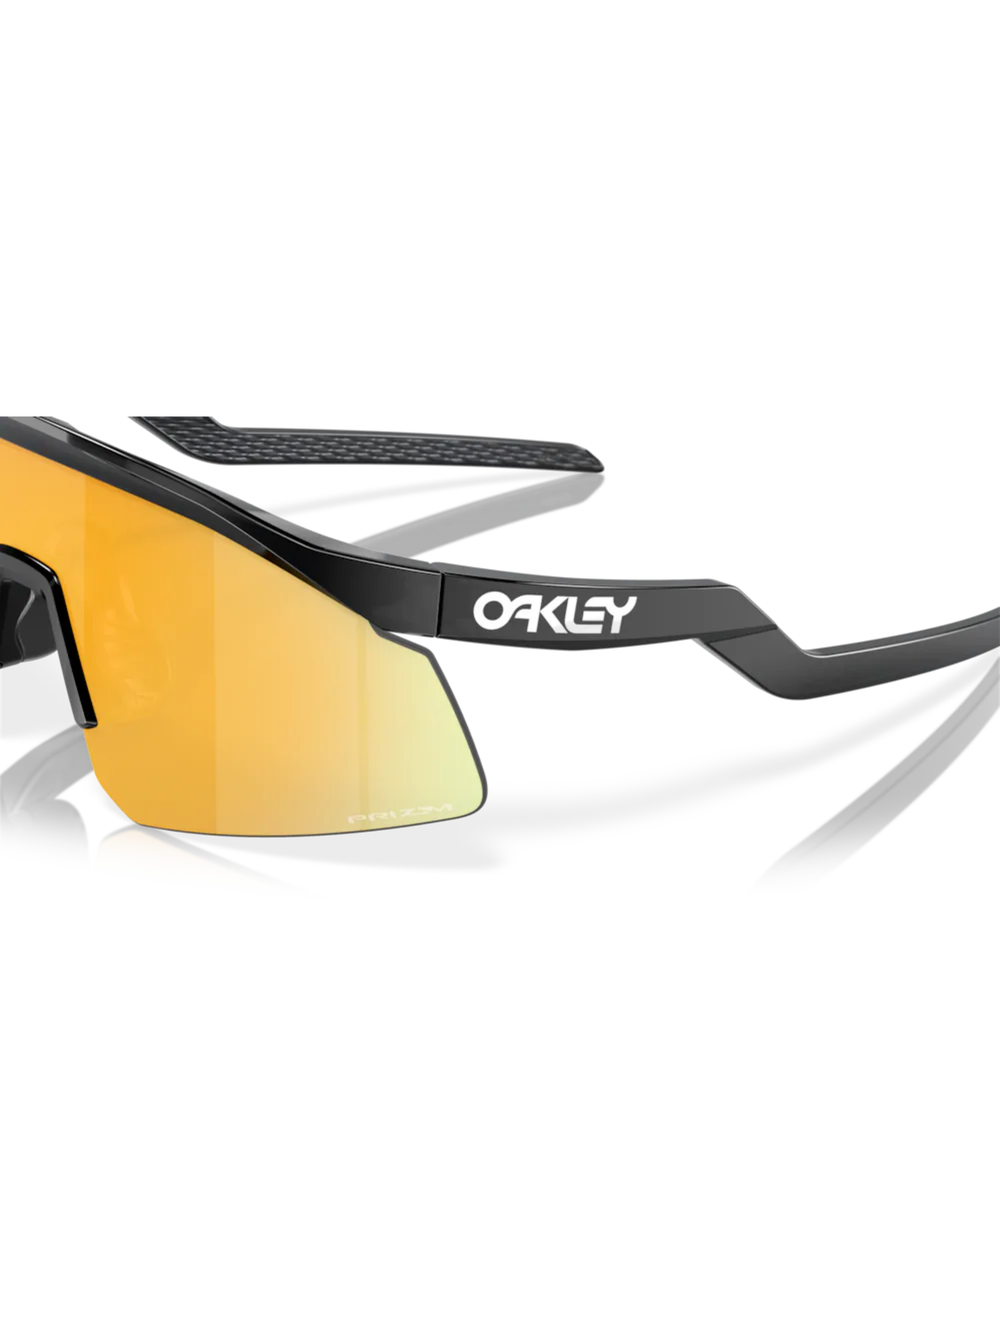 Oakley Elements Thermal Jersey II - Forged Iron